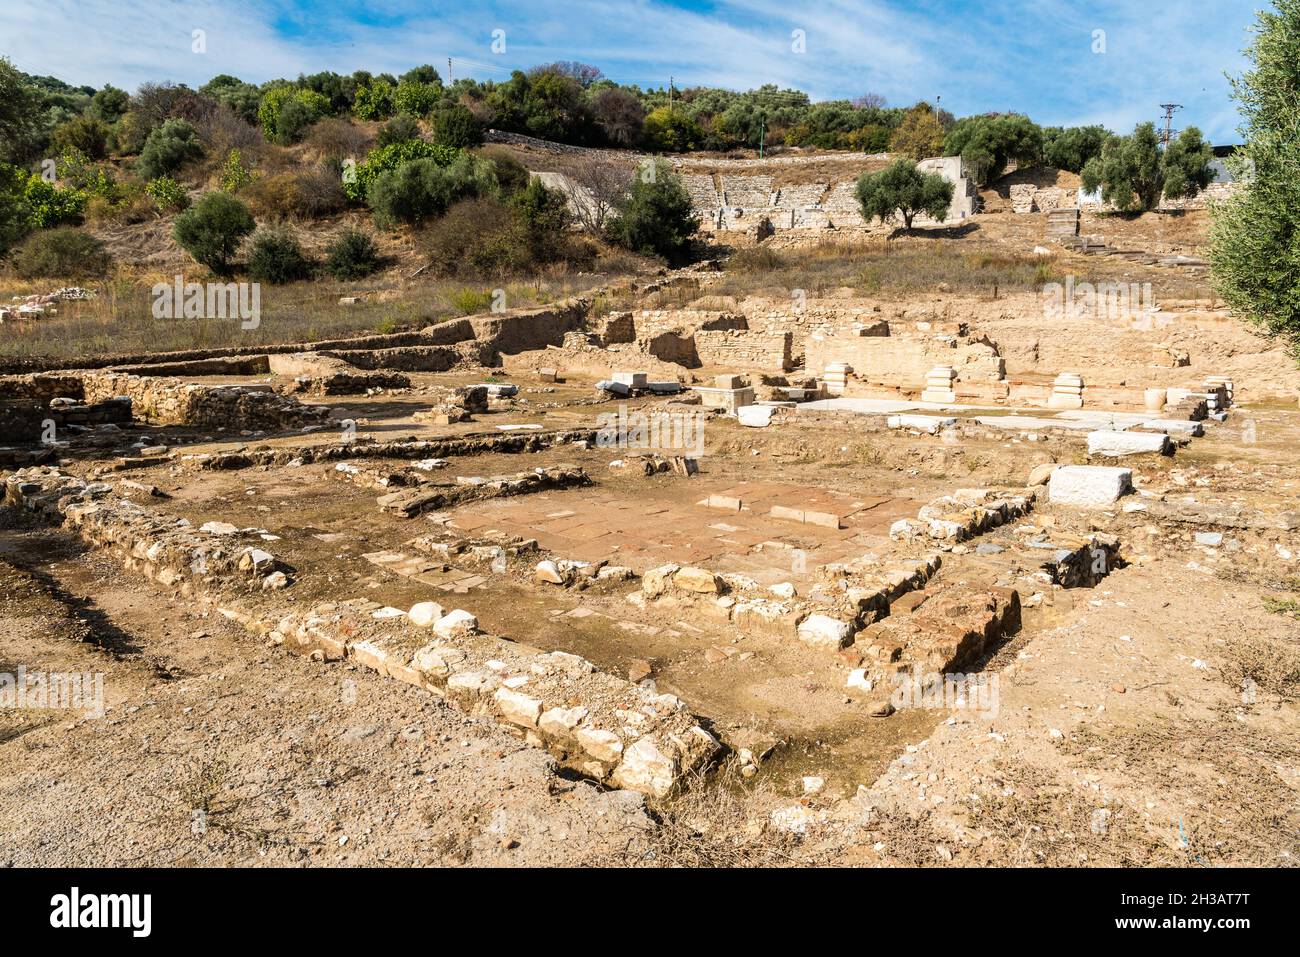 Ruins of the Peristyle House at Metropolis ancient site in Izmir province of Turkey. The large square-planned yard in the middle was covered with marb Stock Photo